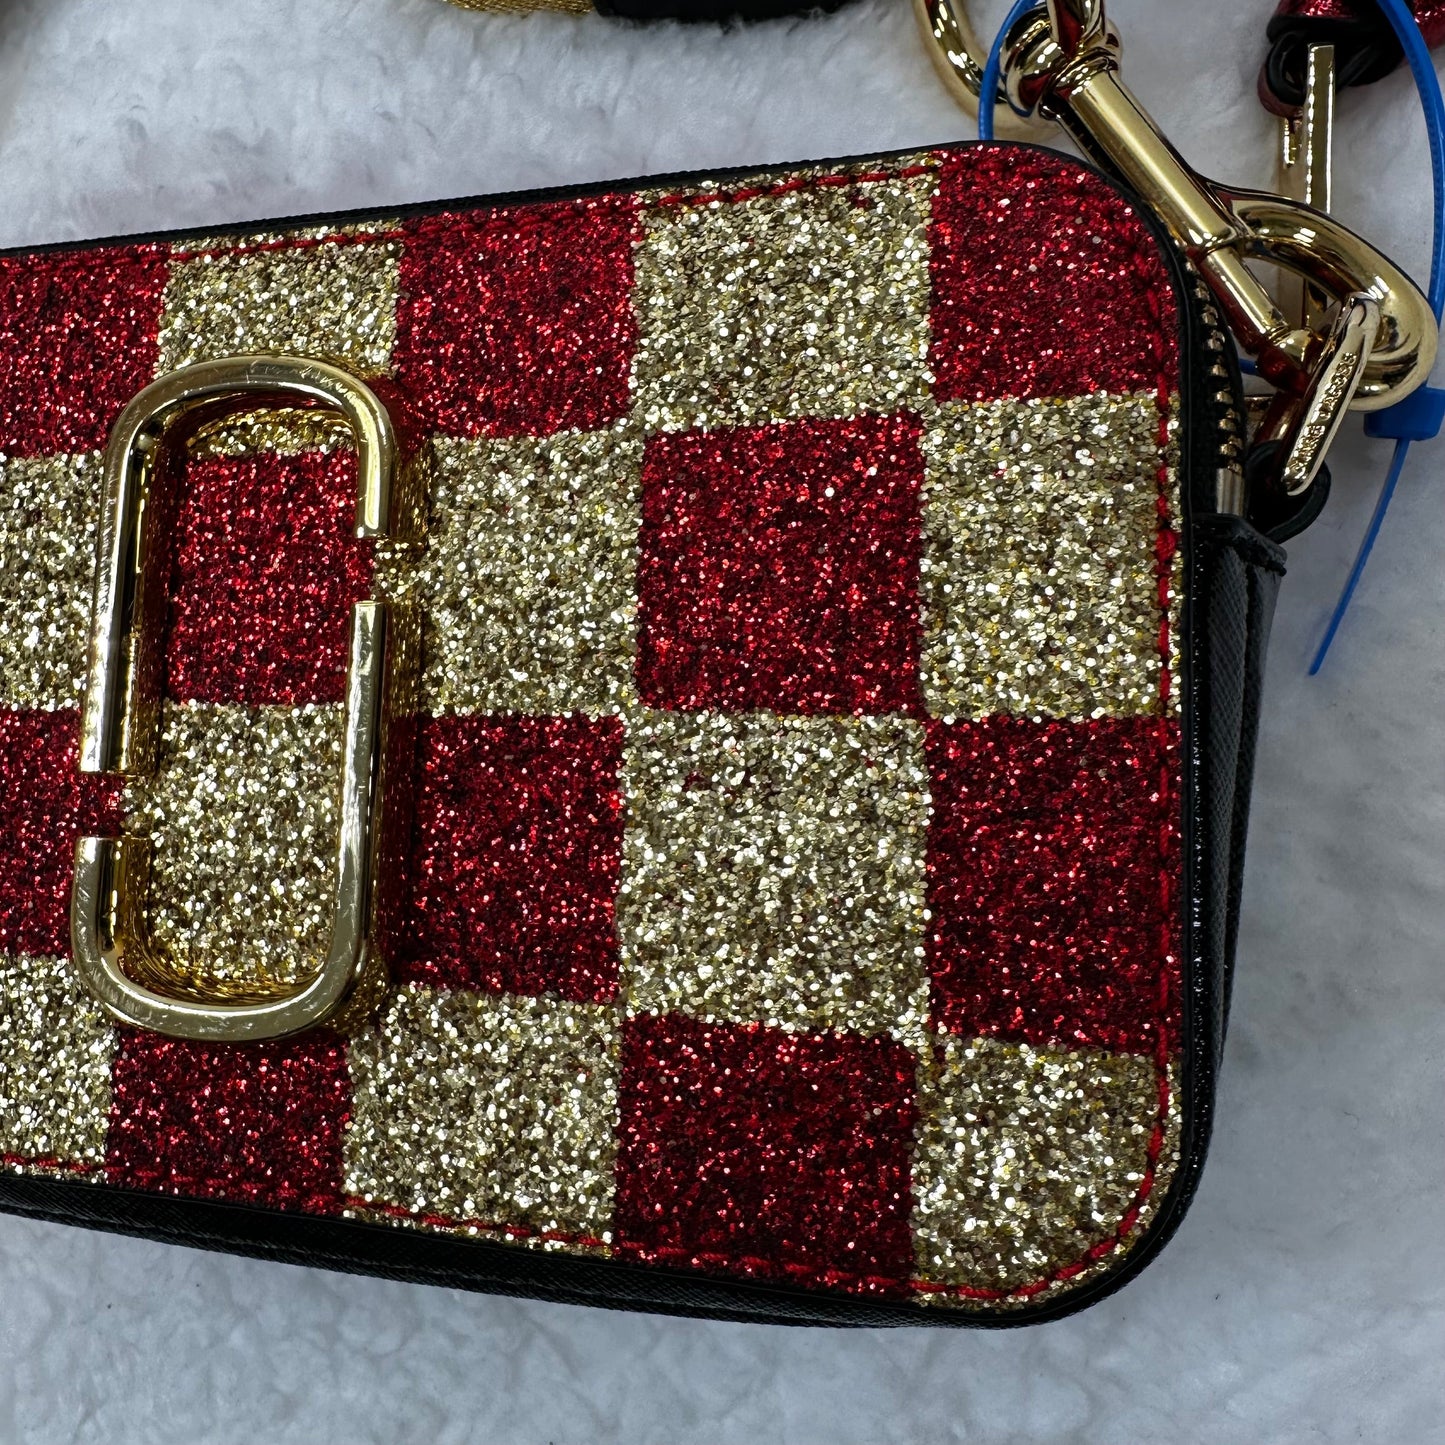 Checked Crossbody Designer Marc Jacobs, Size Small